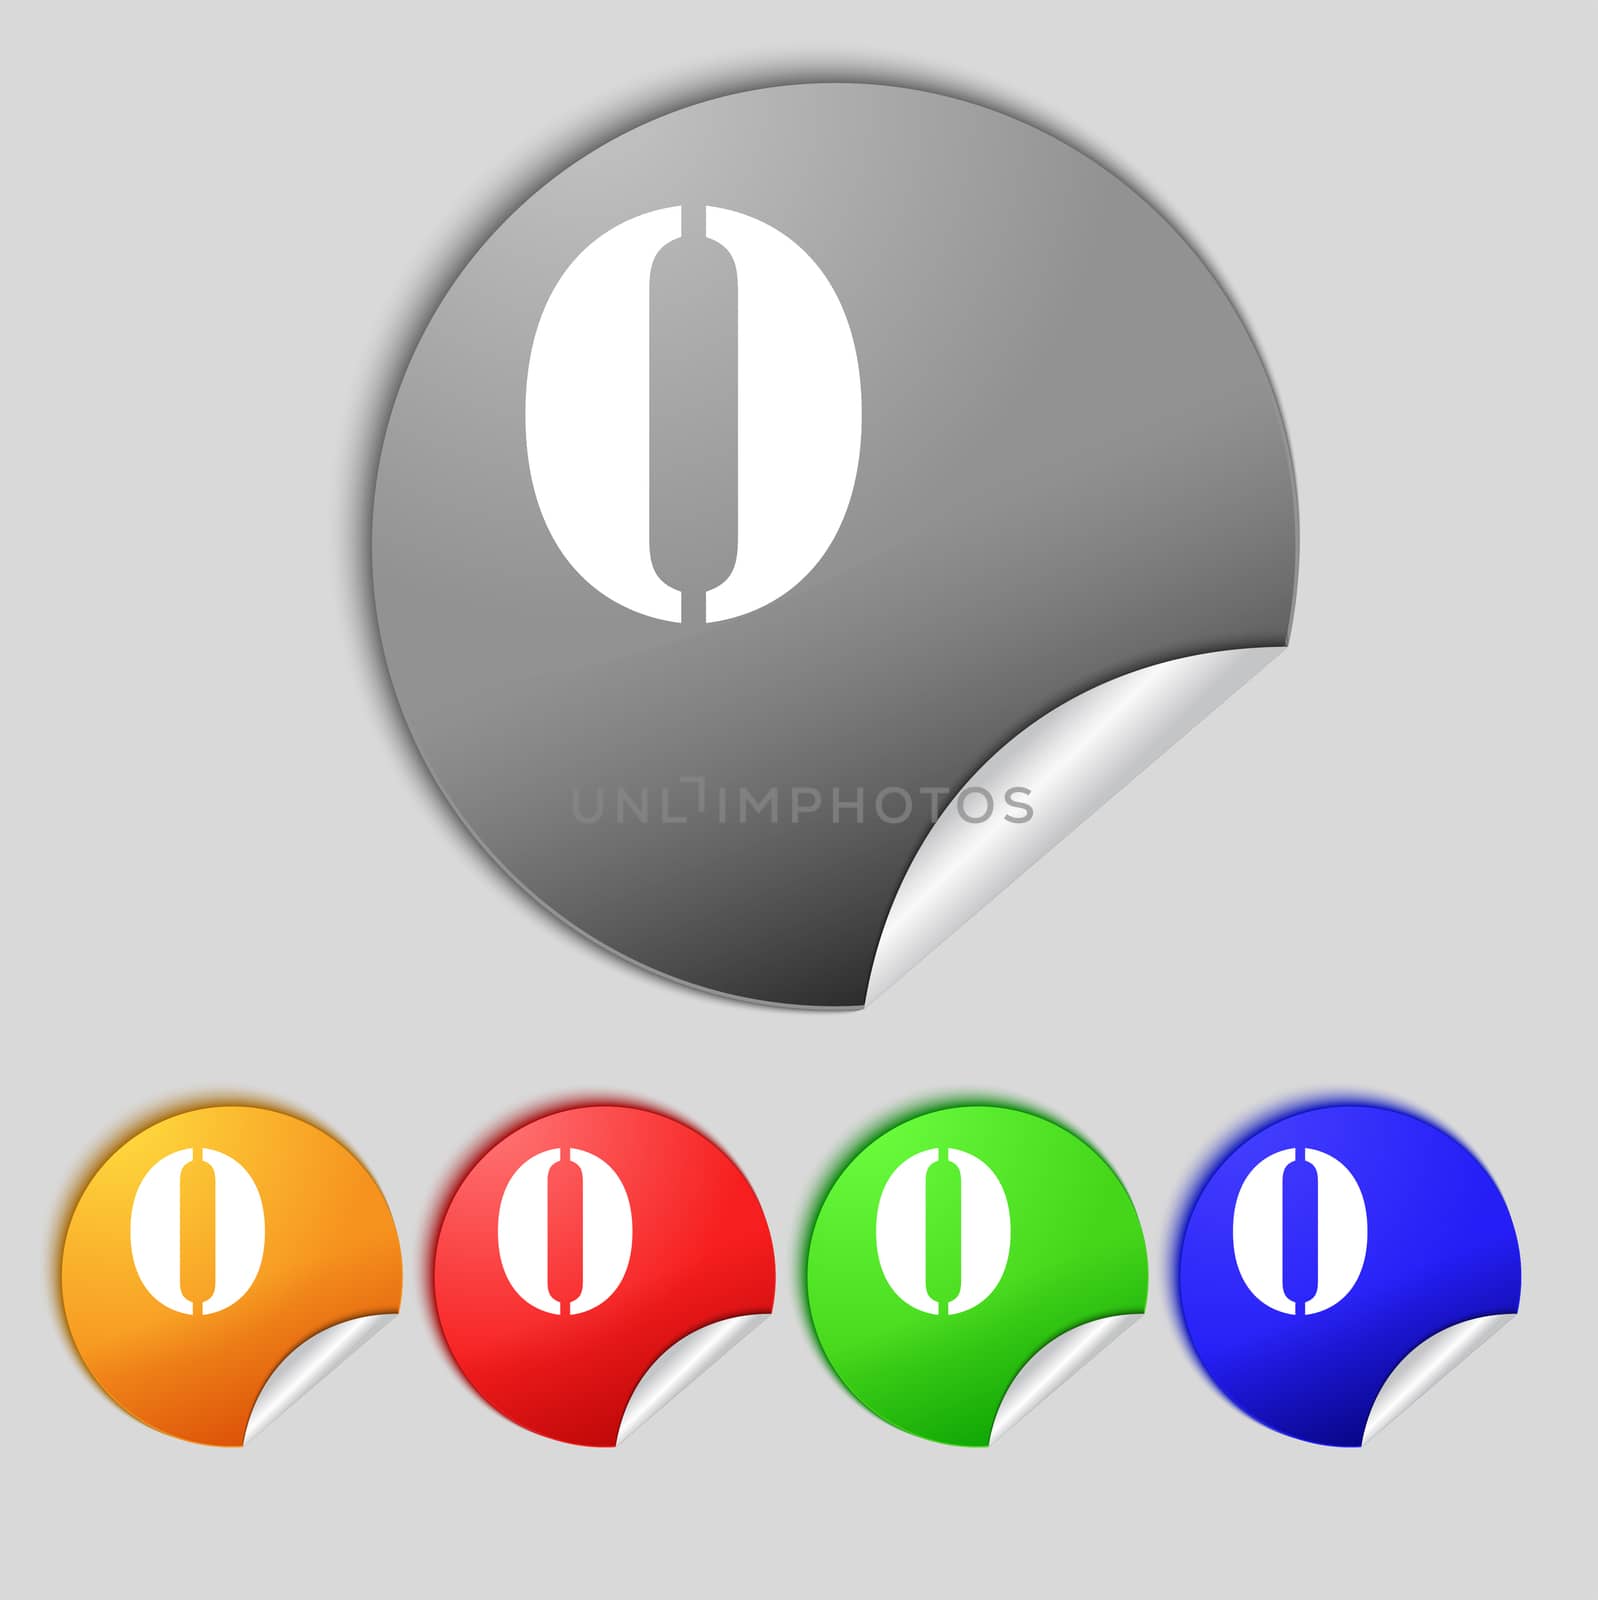 number zero icon sign. Set of coloured buttons. illustration